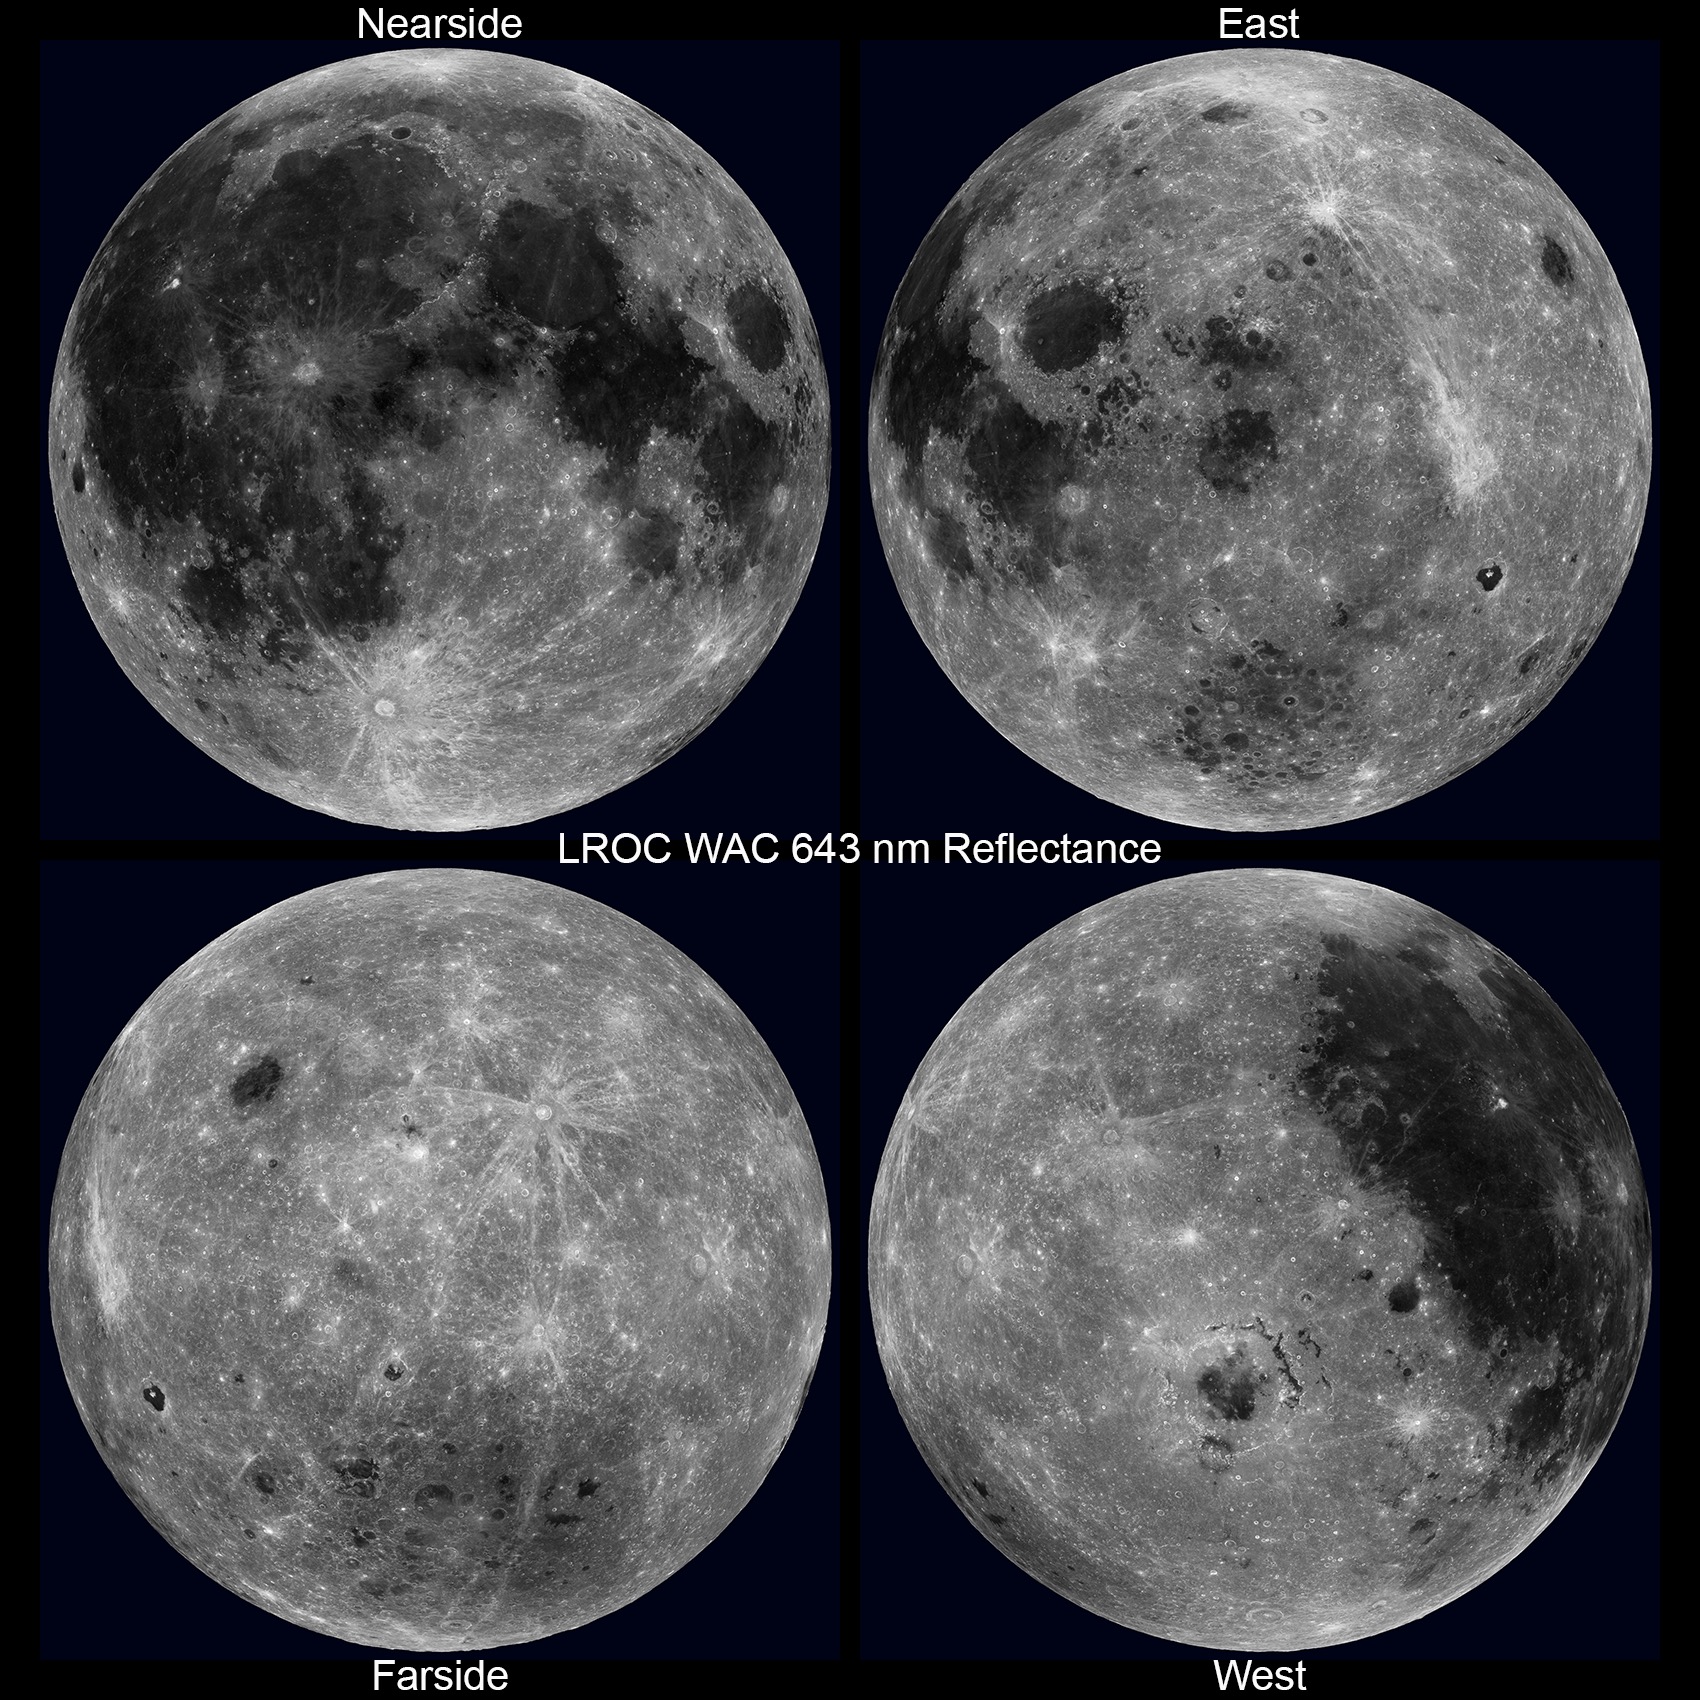 four full-disc views of the Moon, labeled Nearside, East, Farside, and West